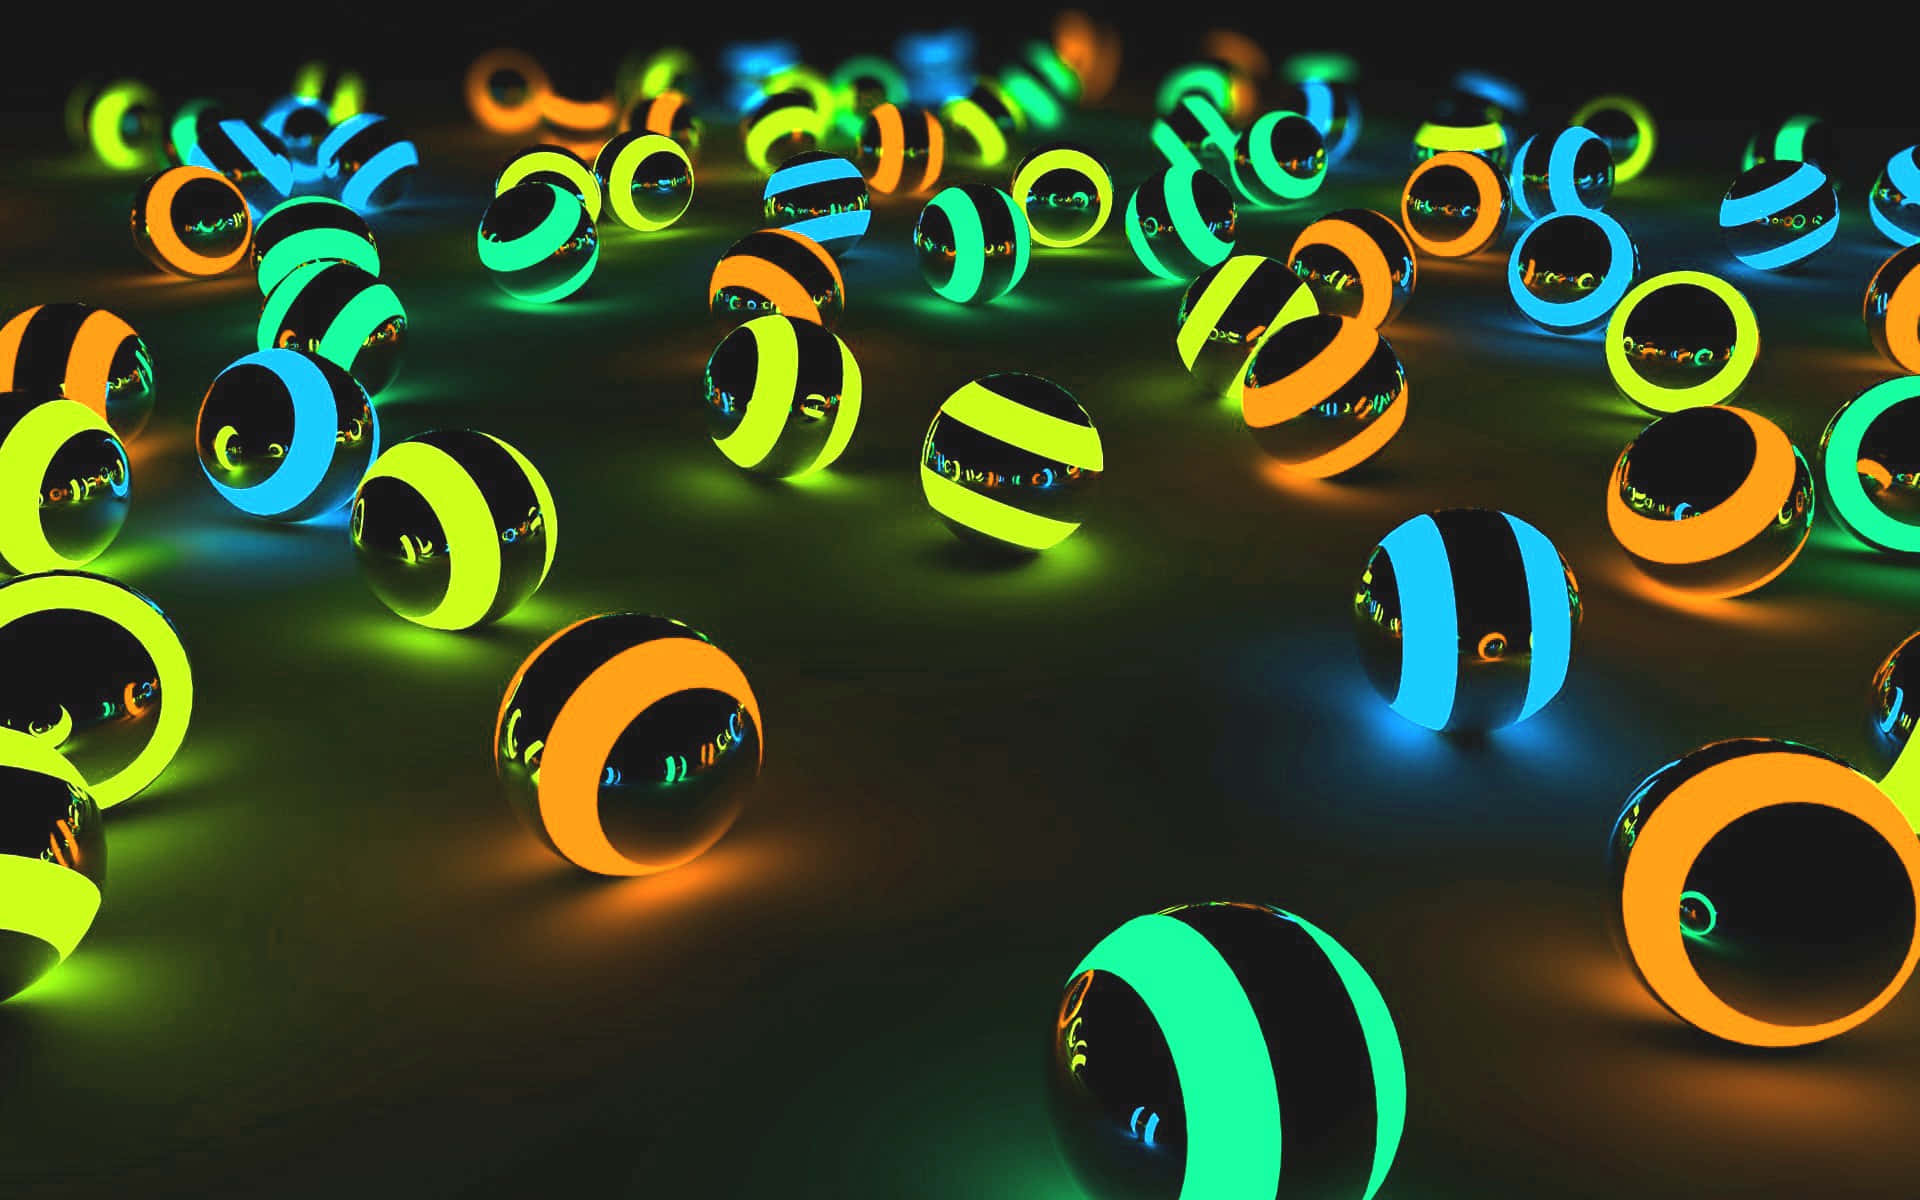 A Group Of Glowing Balls In A Dark Room